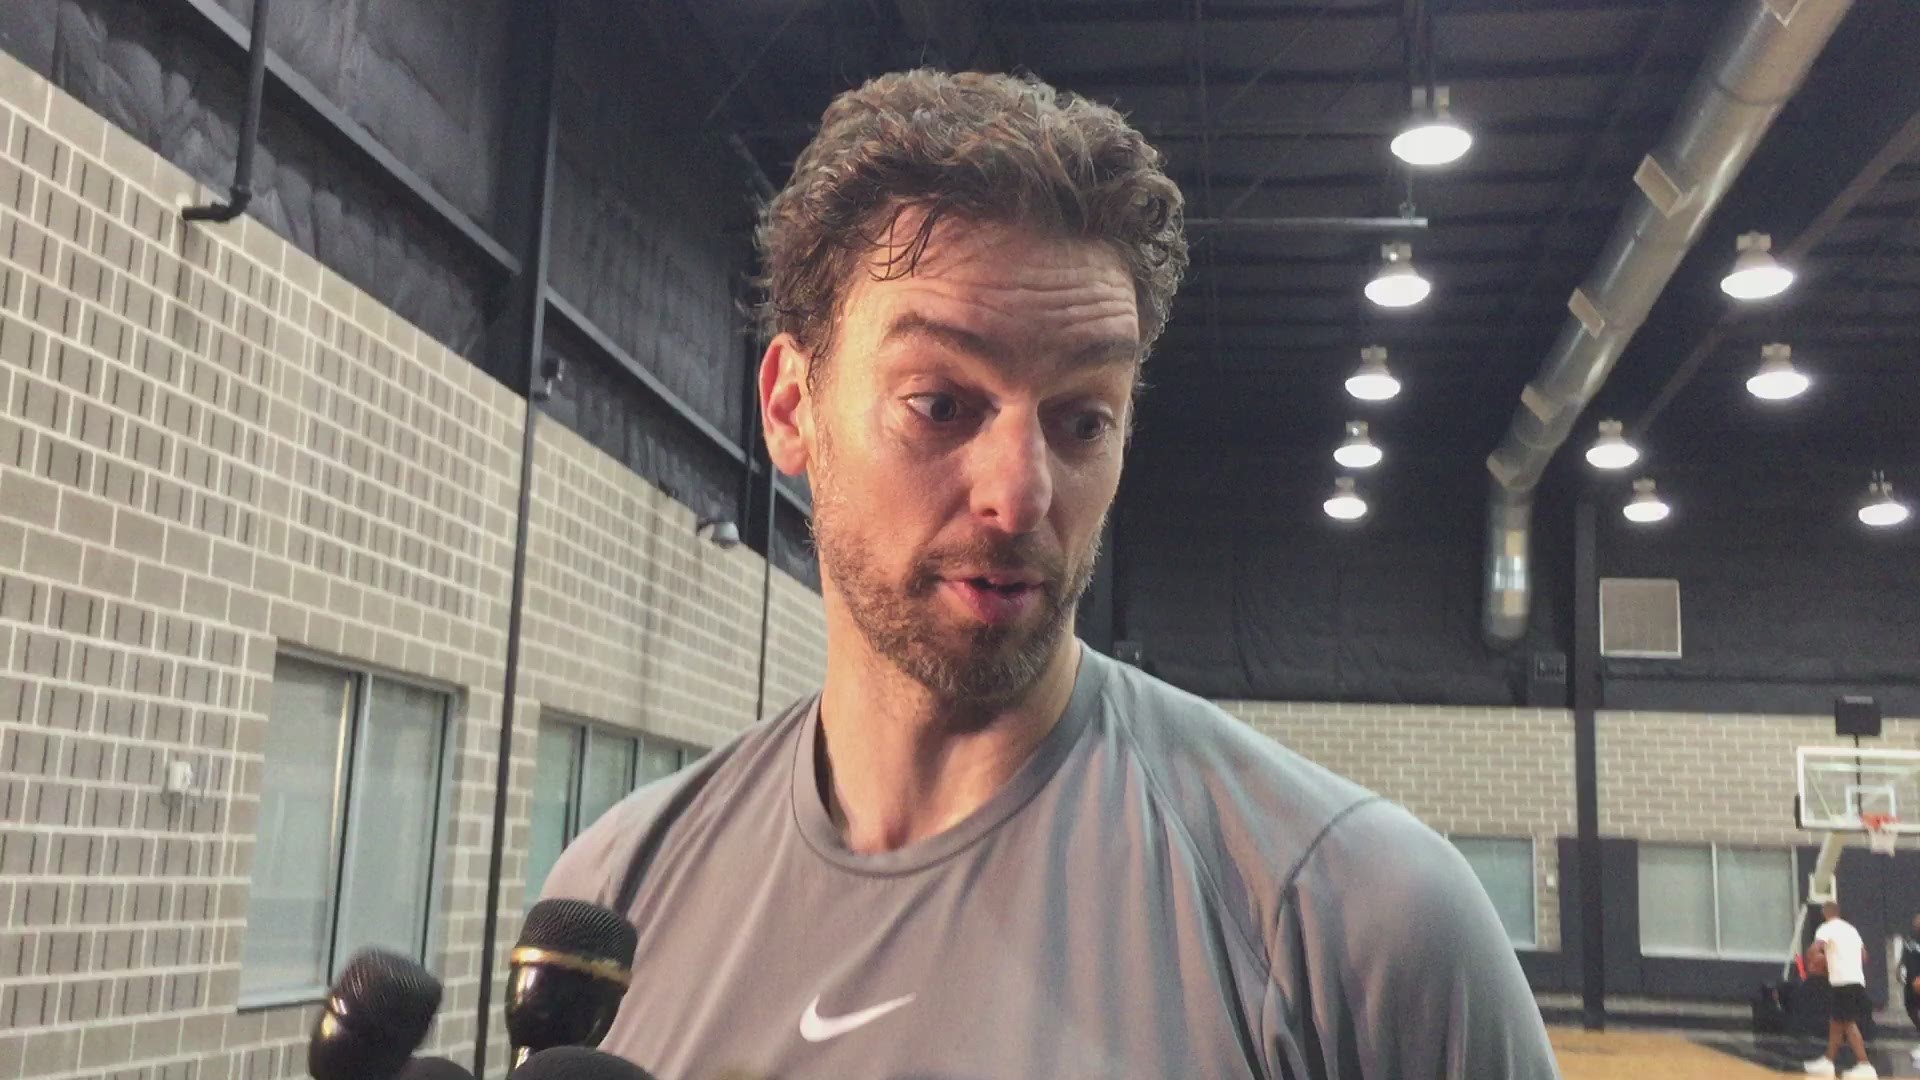 Spurs forward/center Pau Gasol on the start of another season